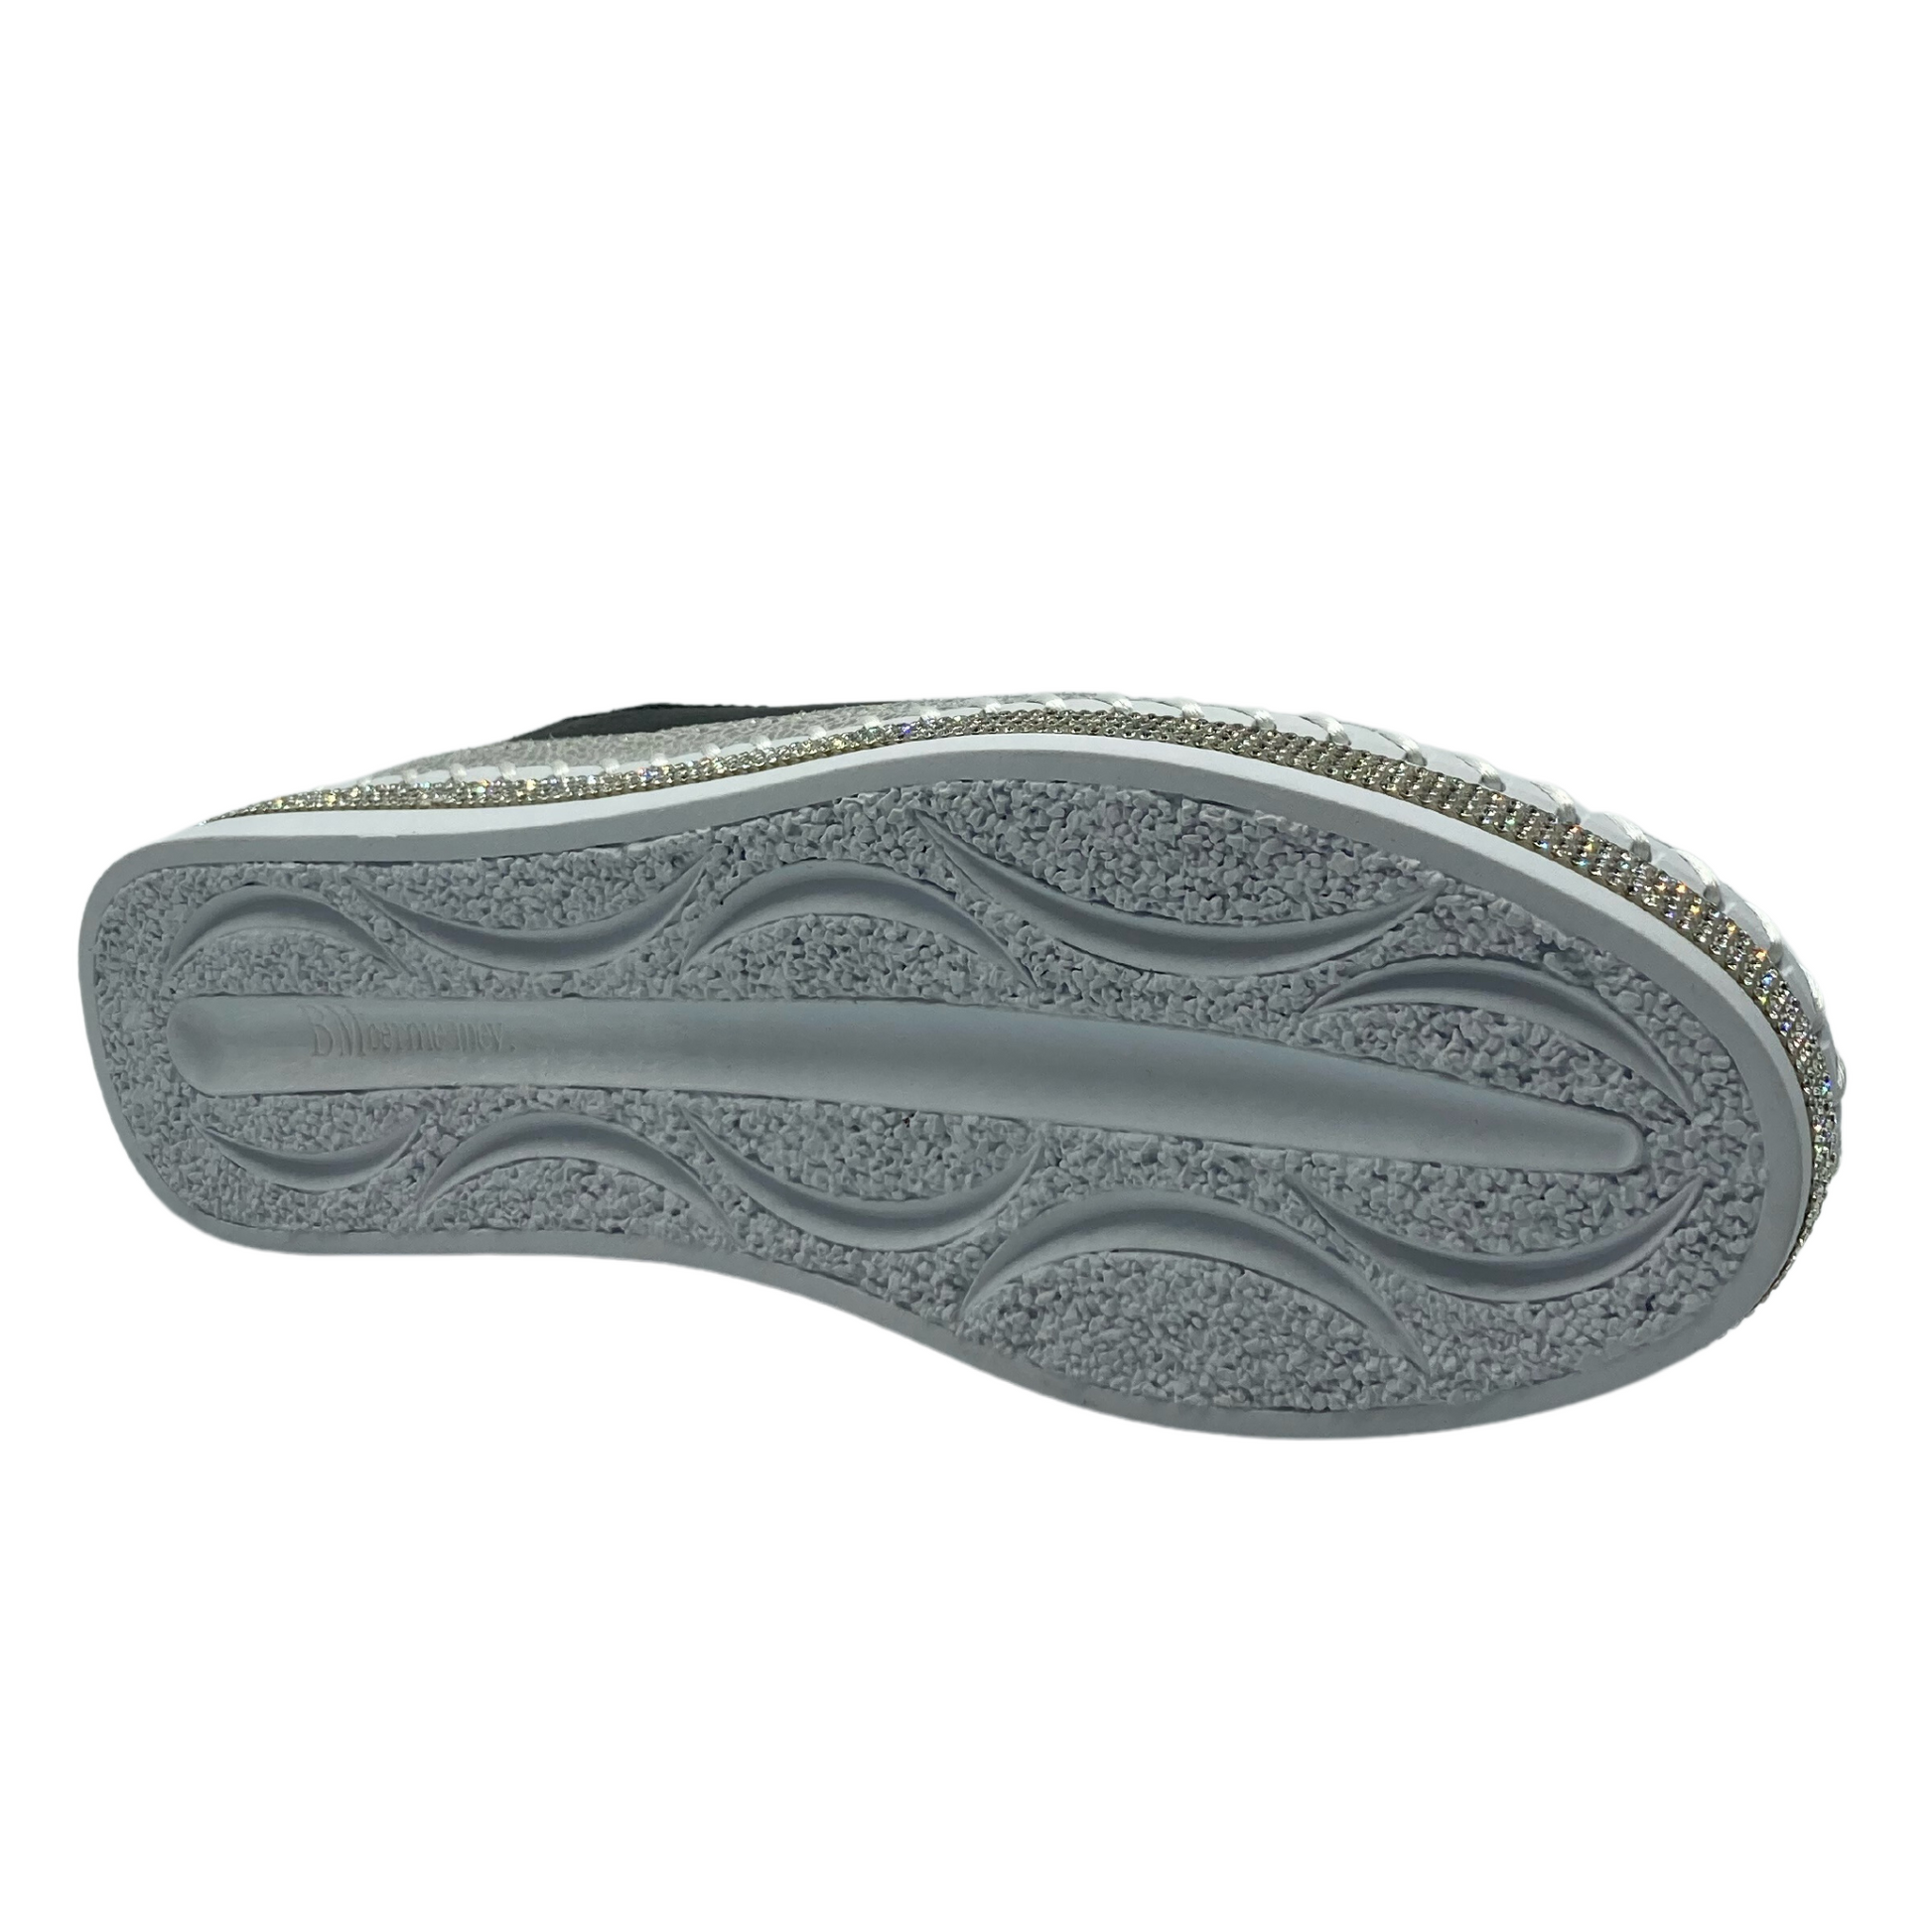 Sole view of bottom of a platform sneaker with white sole